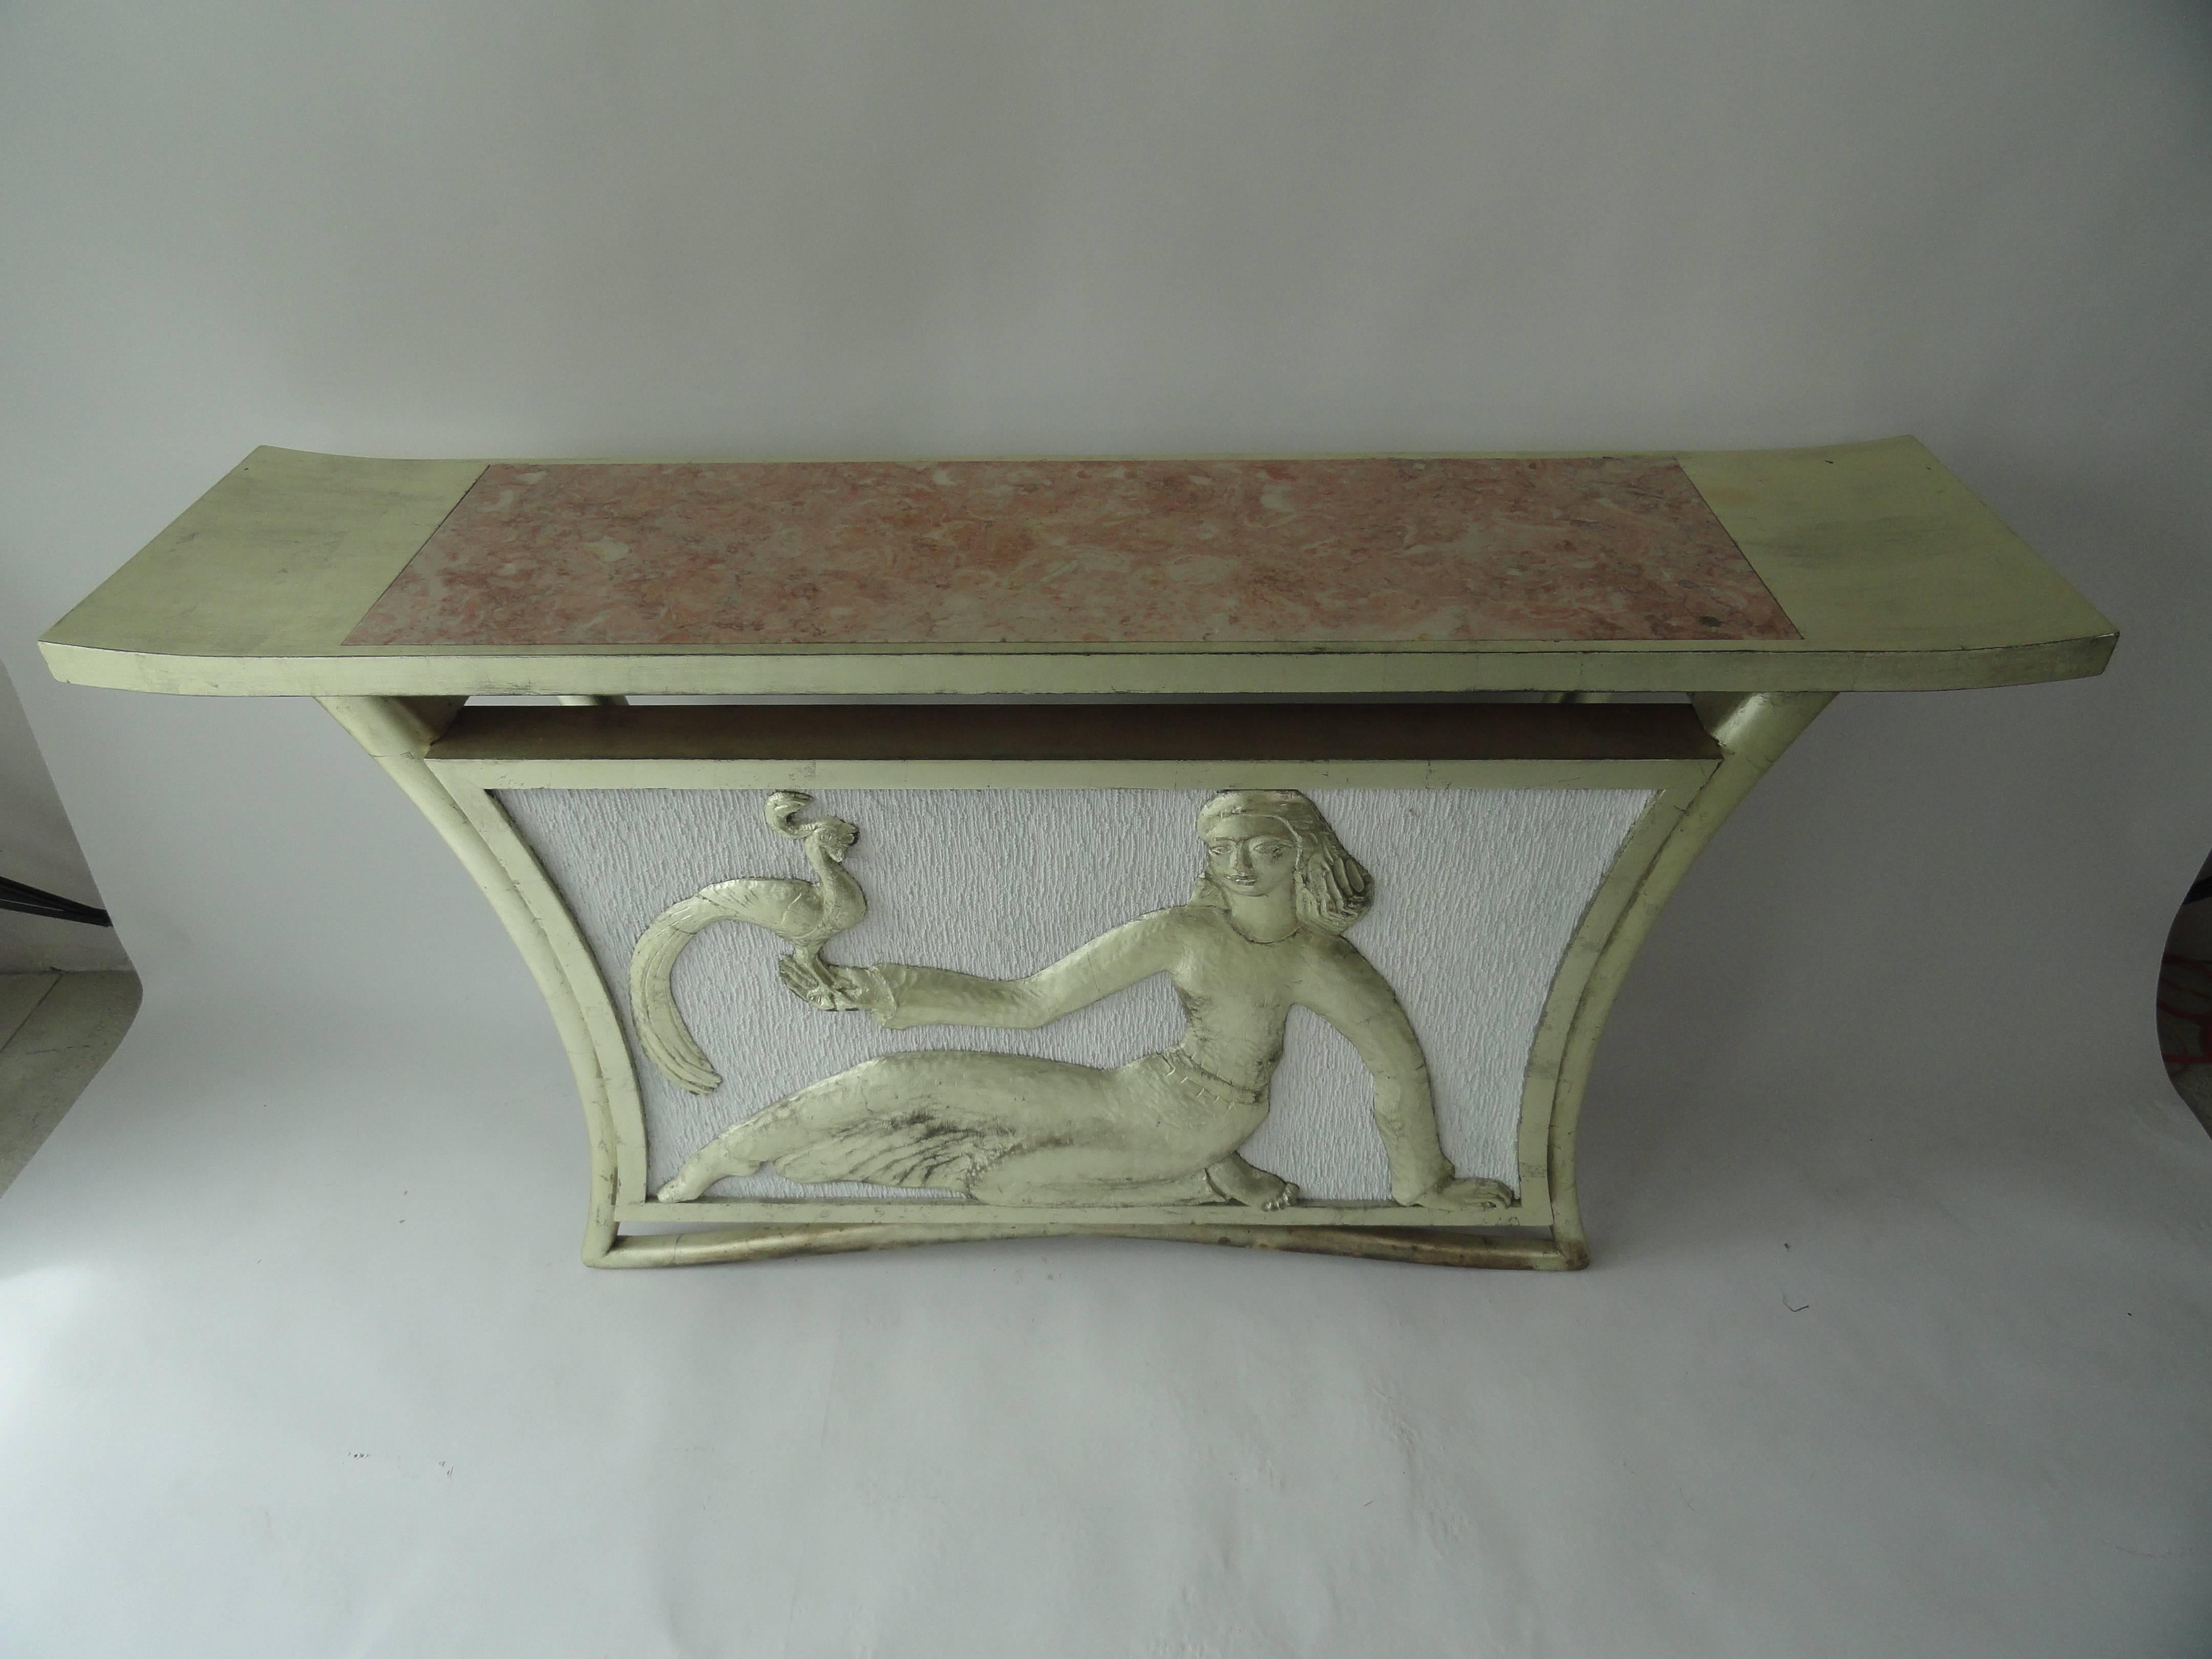 Custom T.H. Robsjohn-Gibbings table with marble inset on top. Carved female figure, Lydia, with peacock. Newer silver leaf finish on frame. White painted fabric background.
Table came from Palm Beach estate.